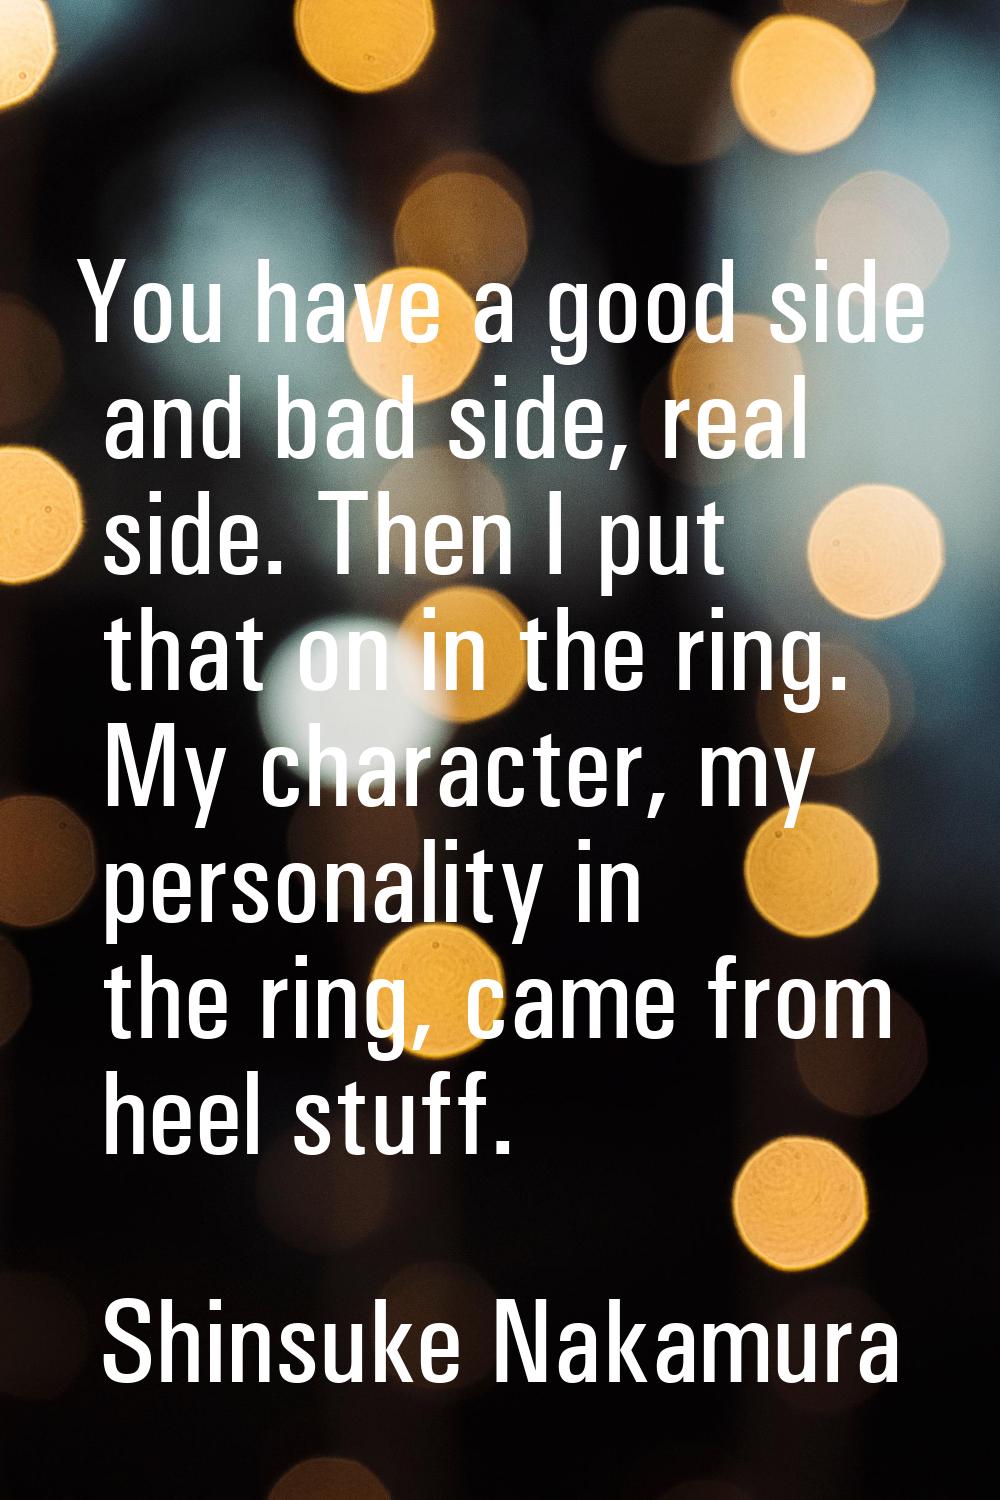 You have a good side and bad side, real side. Then I put that on in the ring. My character, my pers